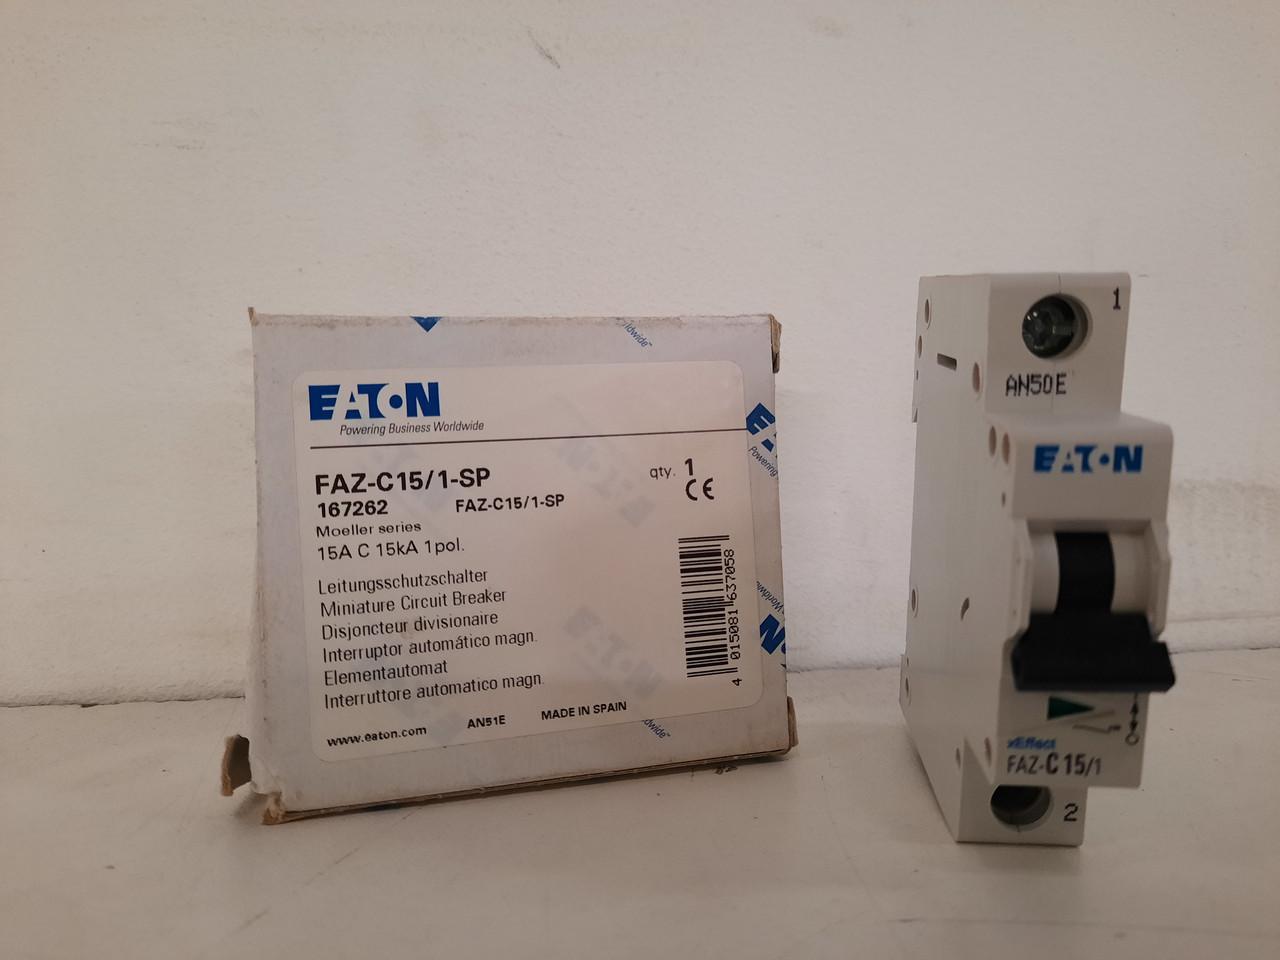 Eaton FAZ-C15/1-SP Eaton FAZ supplementary protector,UL 1077 Industrial miniature circuit breaker-supplementary protector,Single package,Medium levels of inrush current are expected,15A,15 kAIC,Single-pole,277 V,5-10X/n,Q38,50-60 Hz,Standard terminals,C Curve